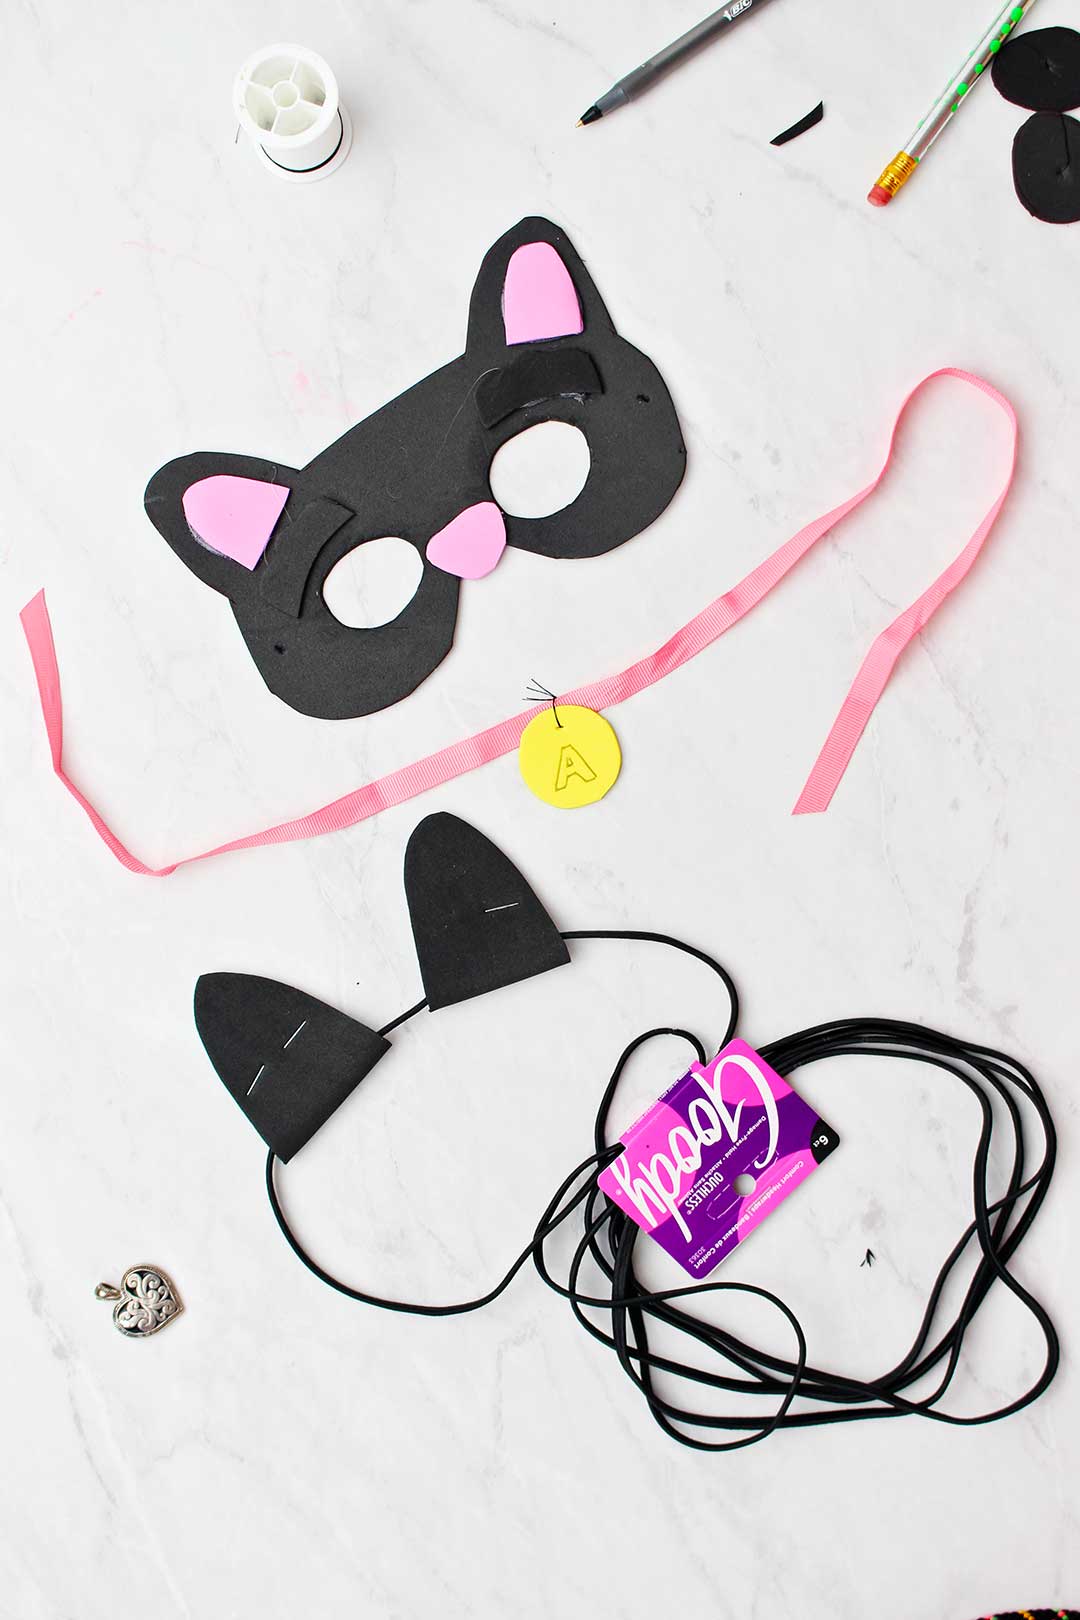 Black cat mask, collar and ears made from foam and black hair elastic.